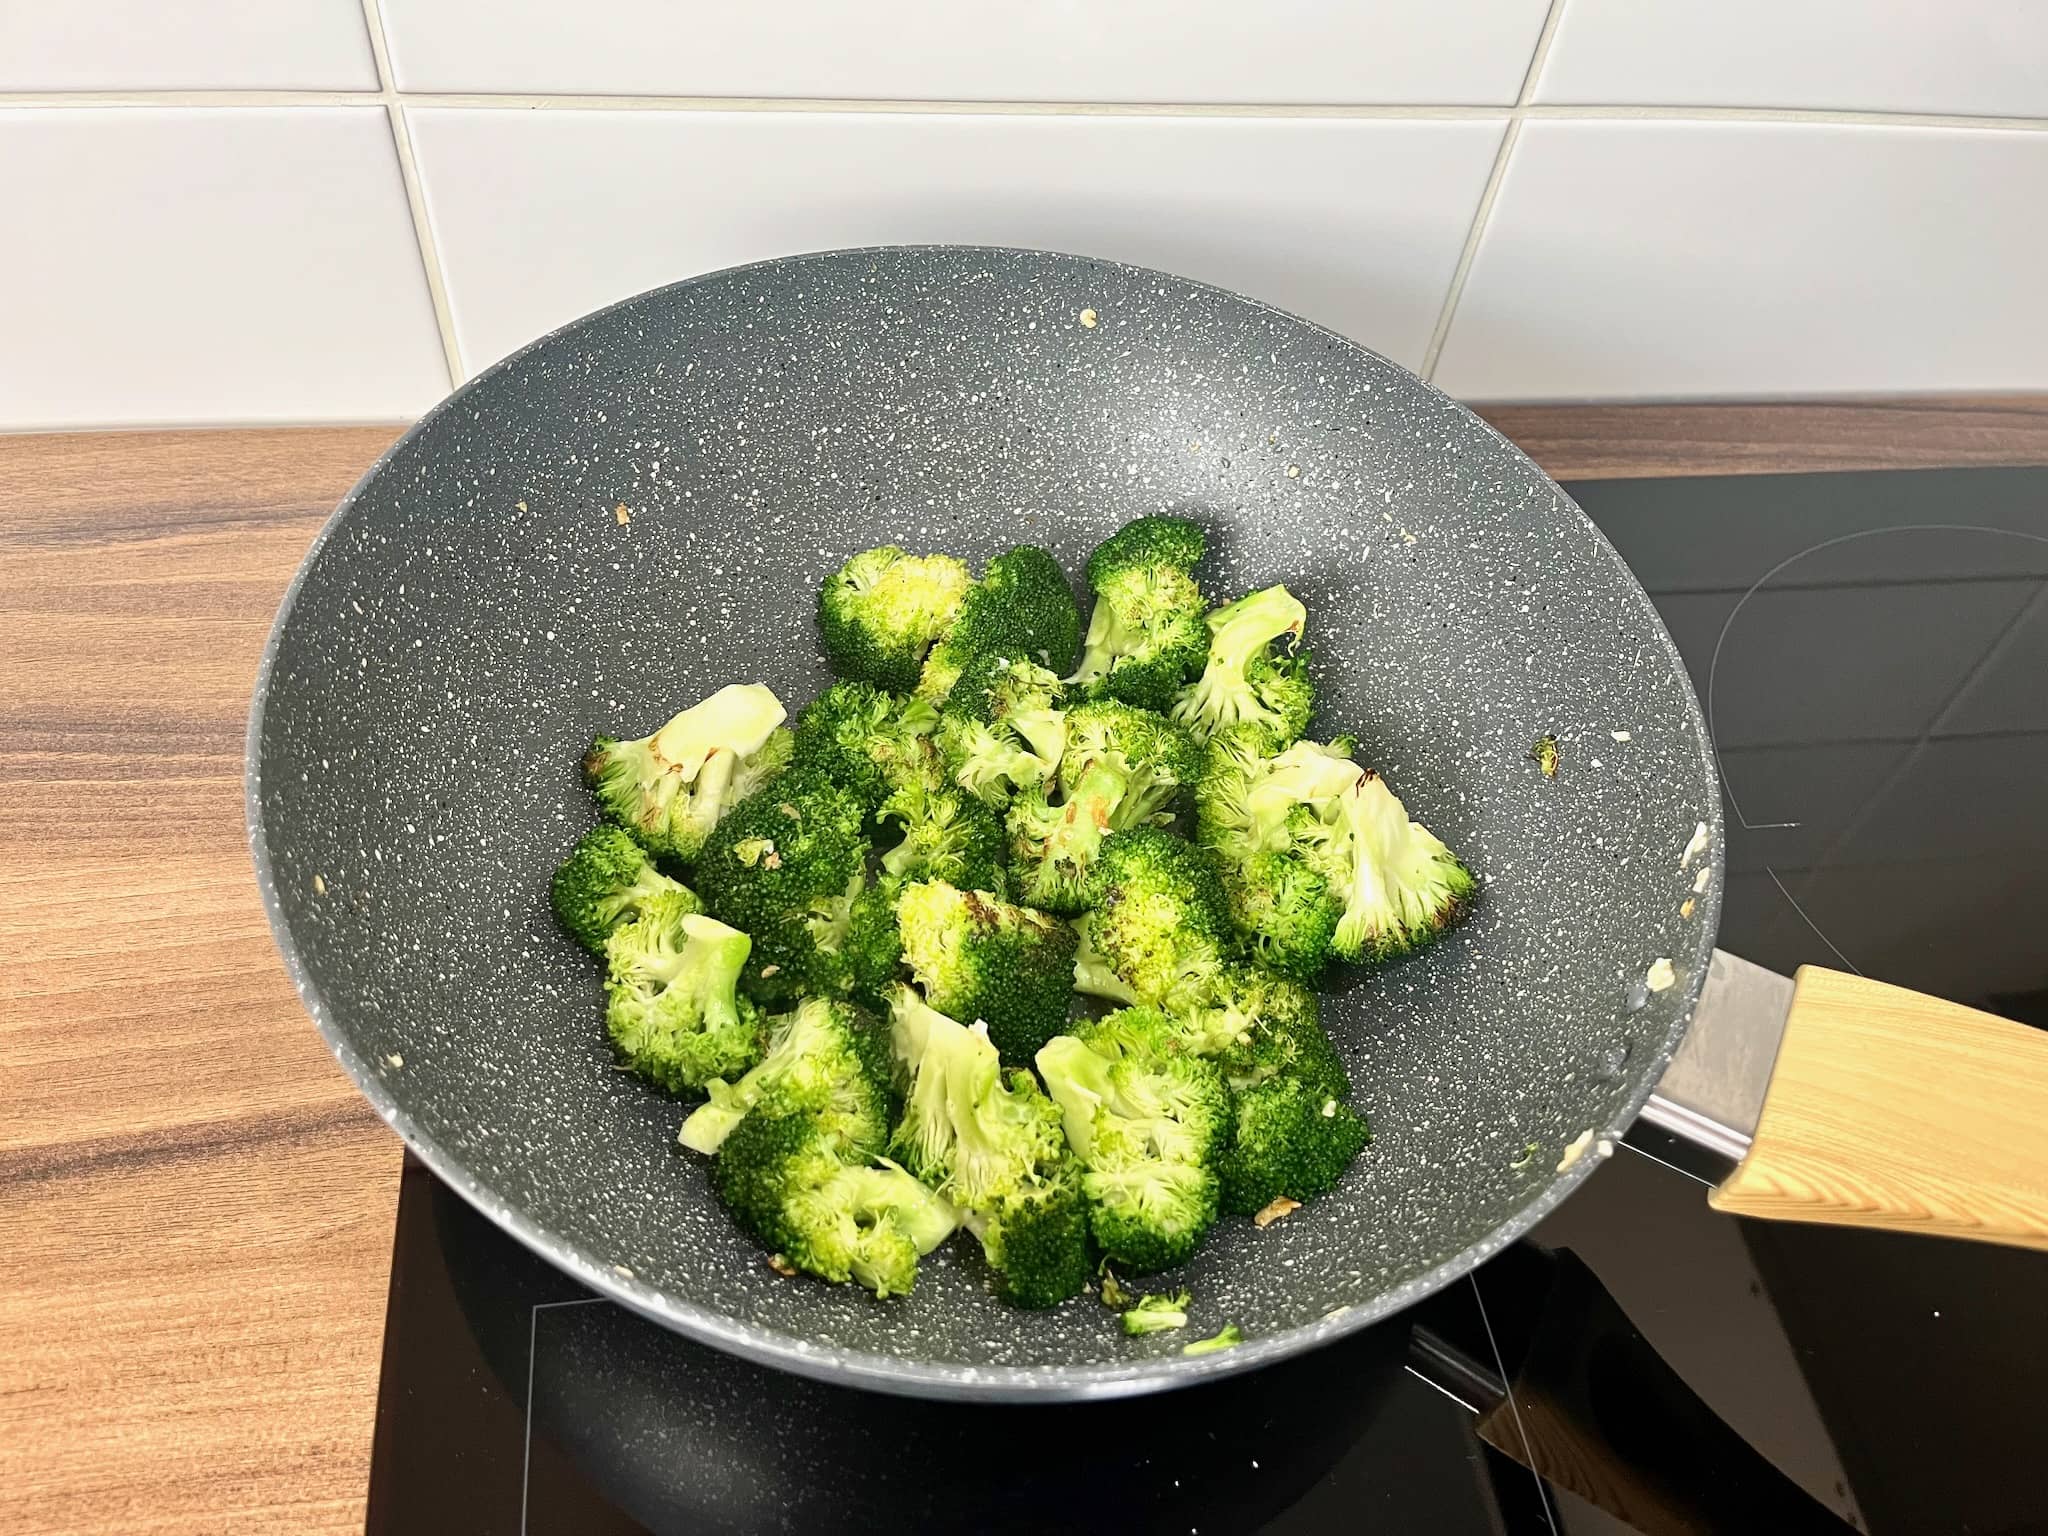 Broccoli florets and garlic frying in a pan